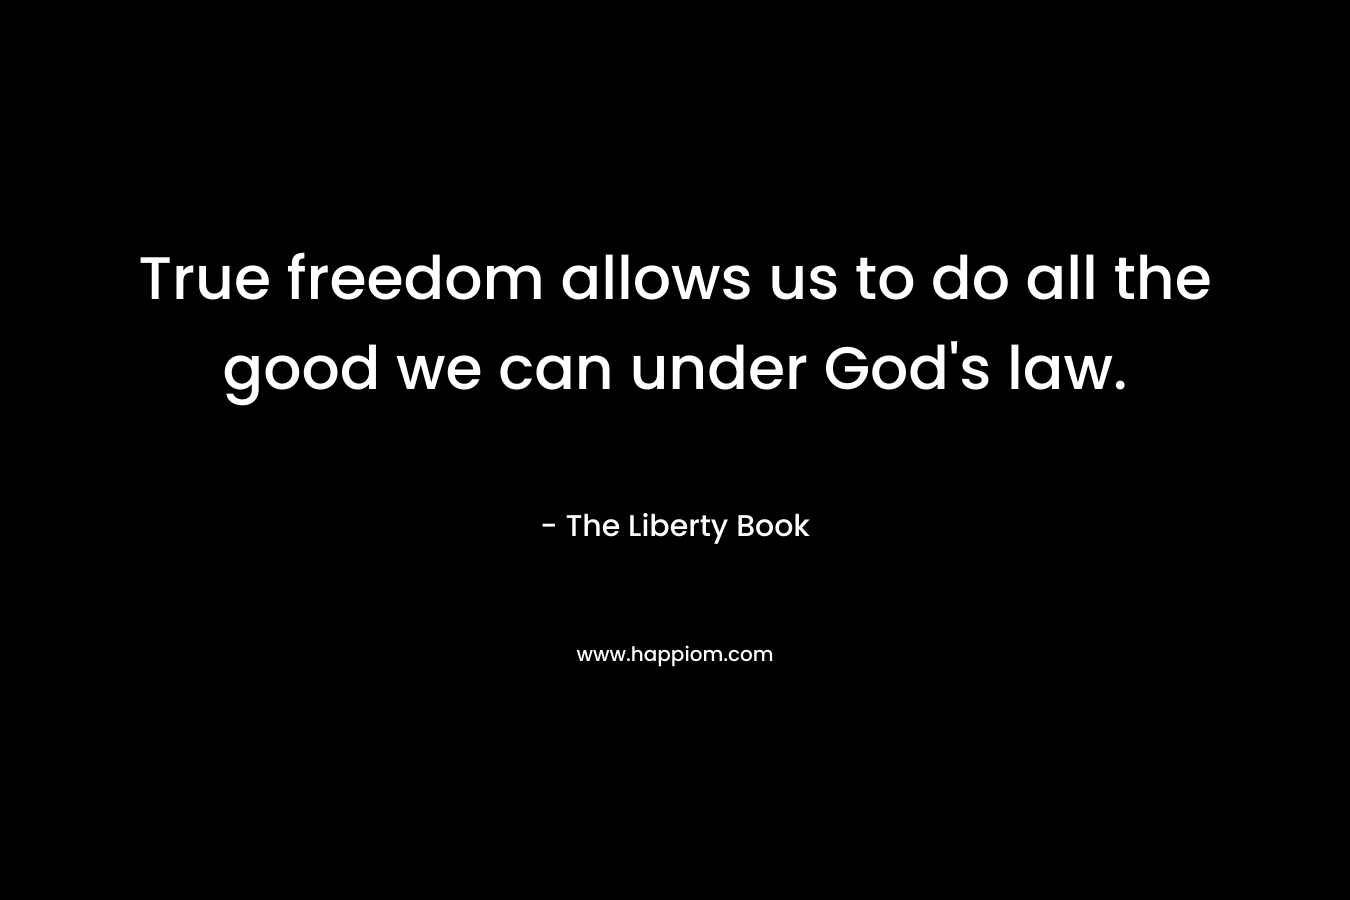 True freedom allows us to do all the good we can under God's law.